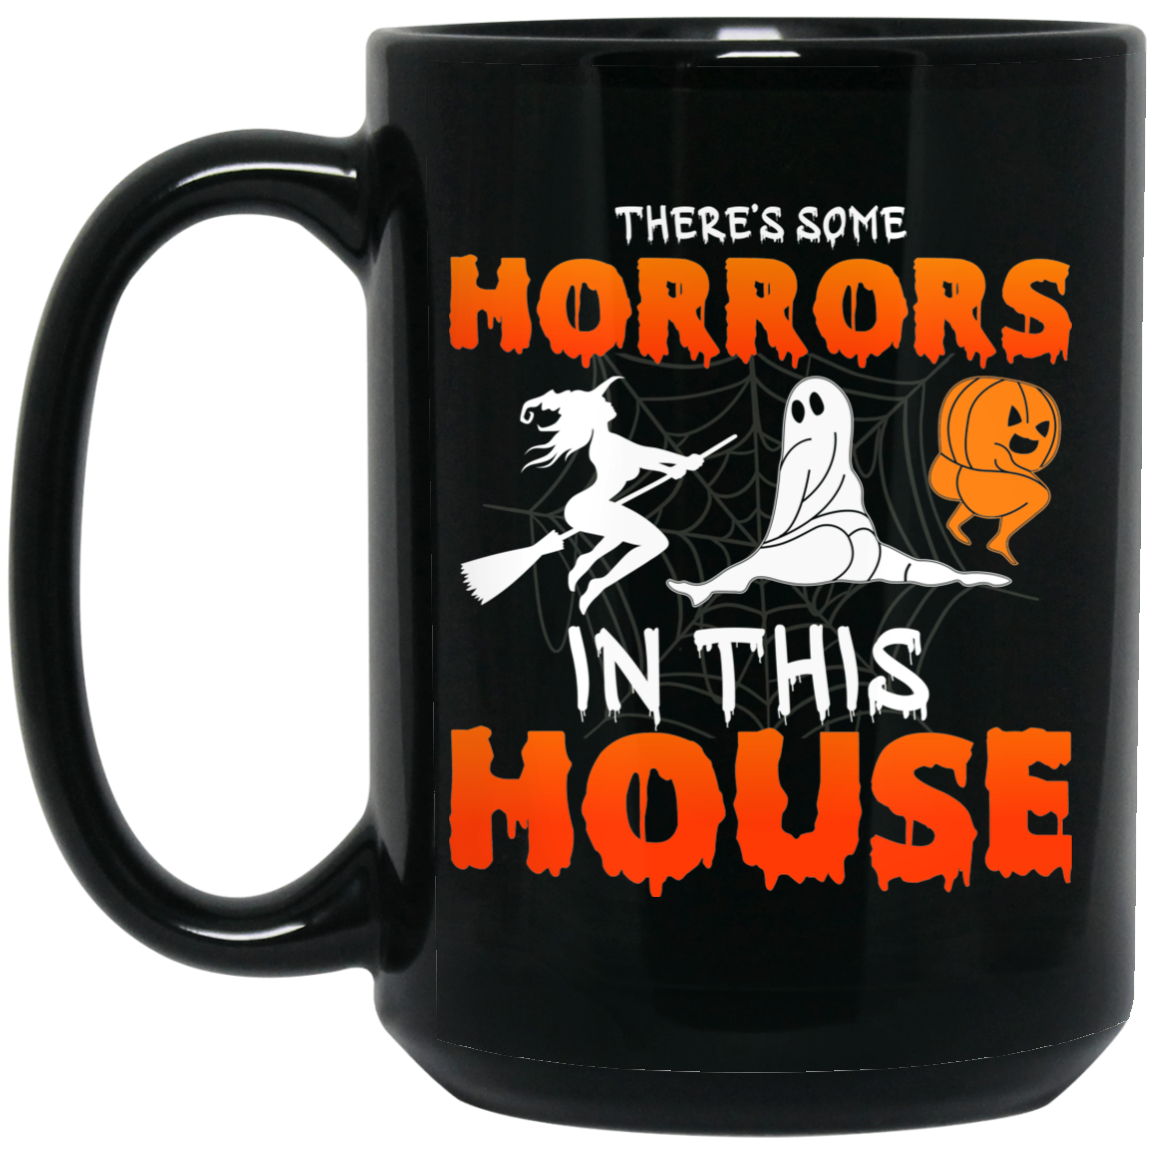 There's Some Horrors In This House |15 oz. Black Mug